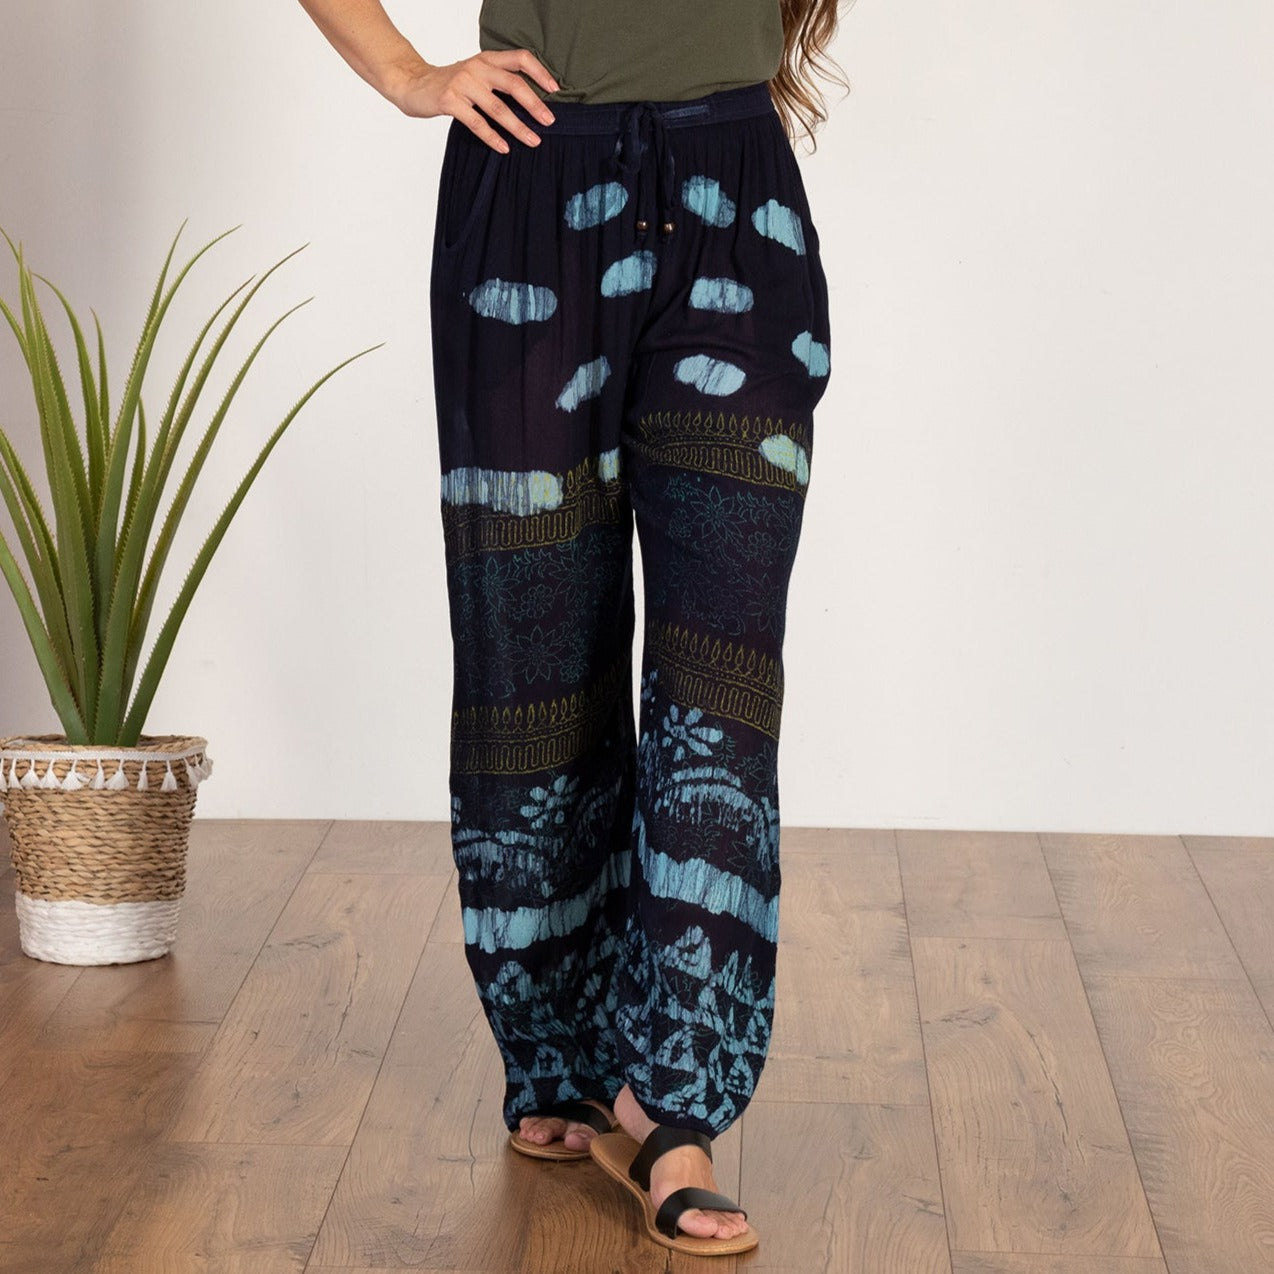 Women's Made To Move Casual Palazzo Pants & Top Set - Pants - Black & Blue - 4X